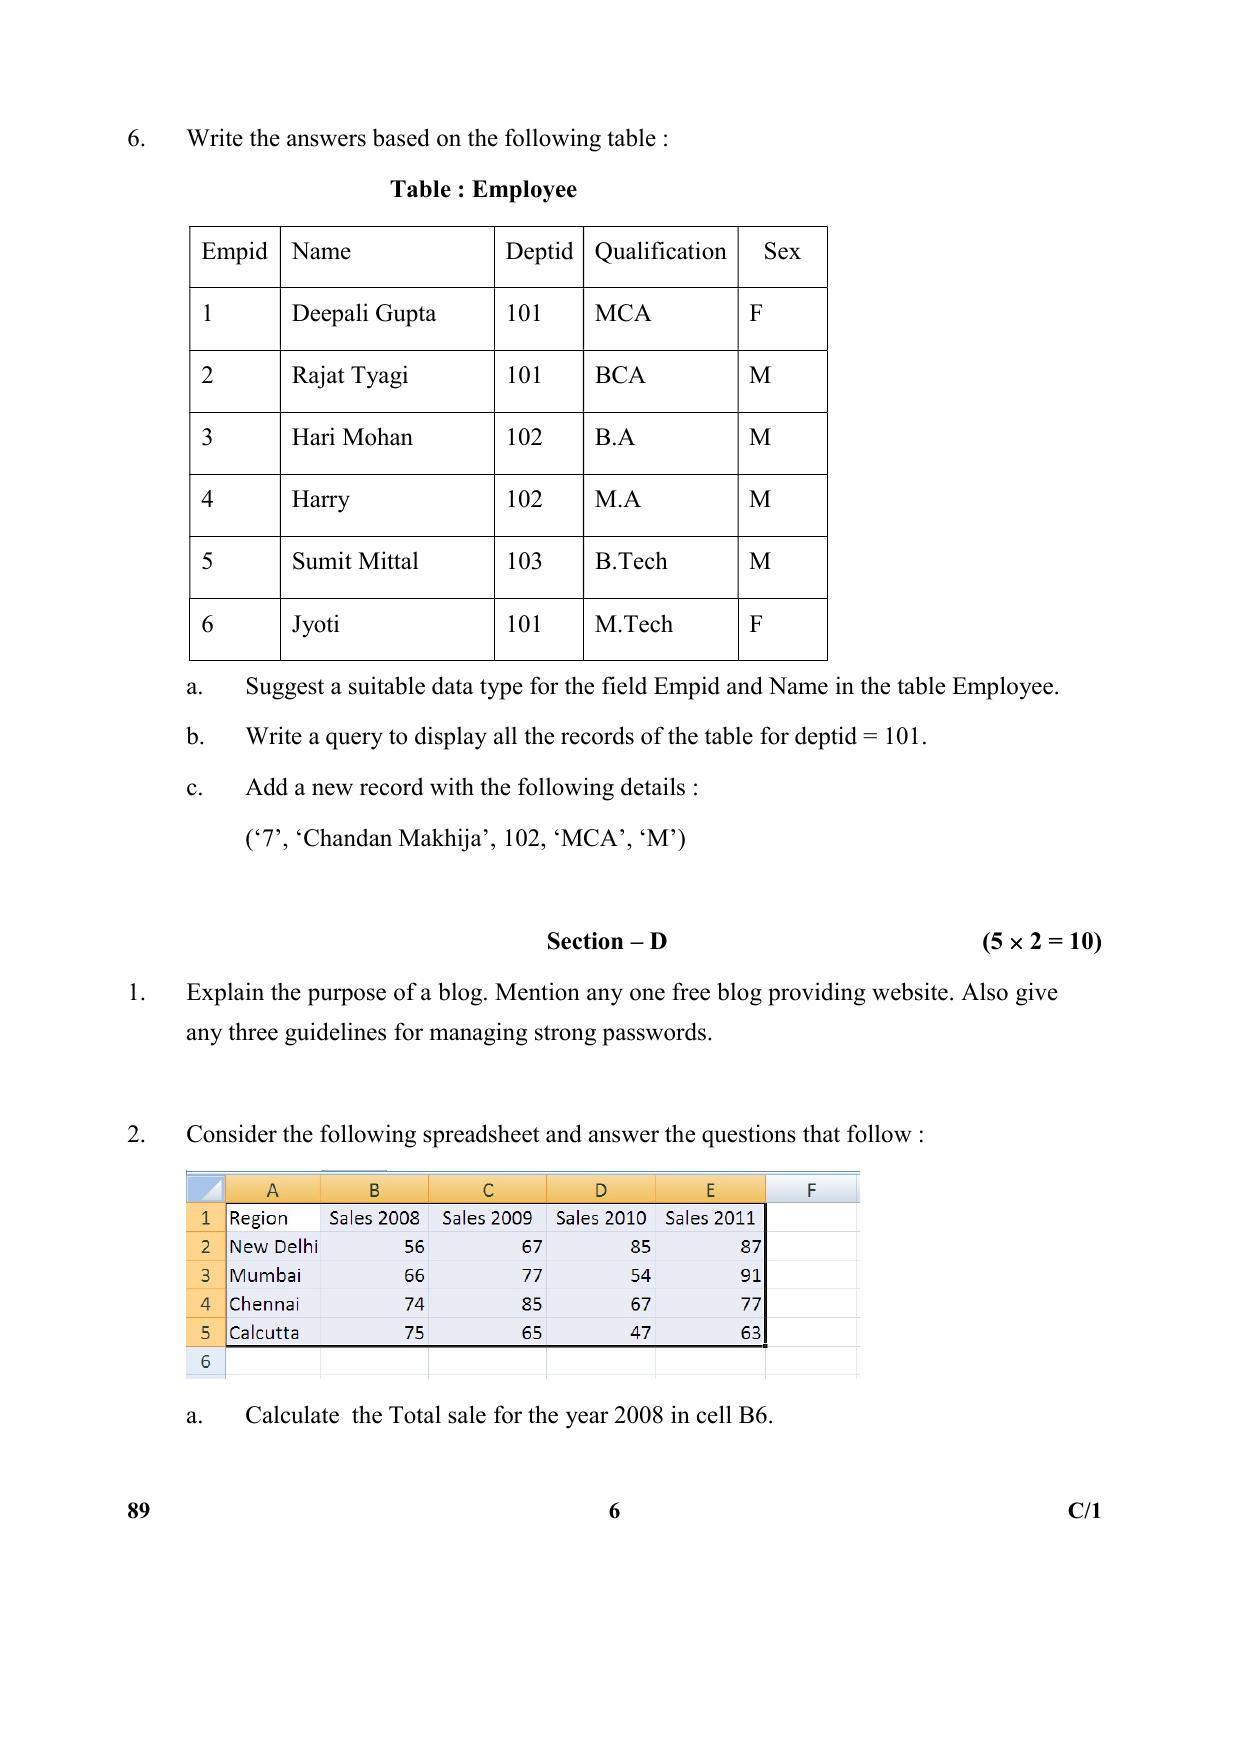 CBSE Class 10 89 (Information Technology) 2018 Compartment Question Paper - Page 6